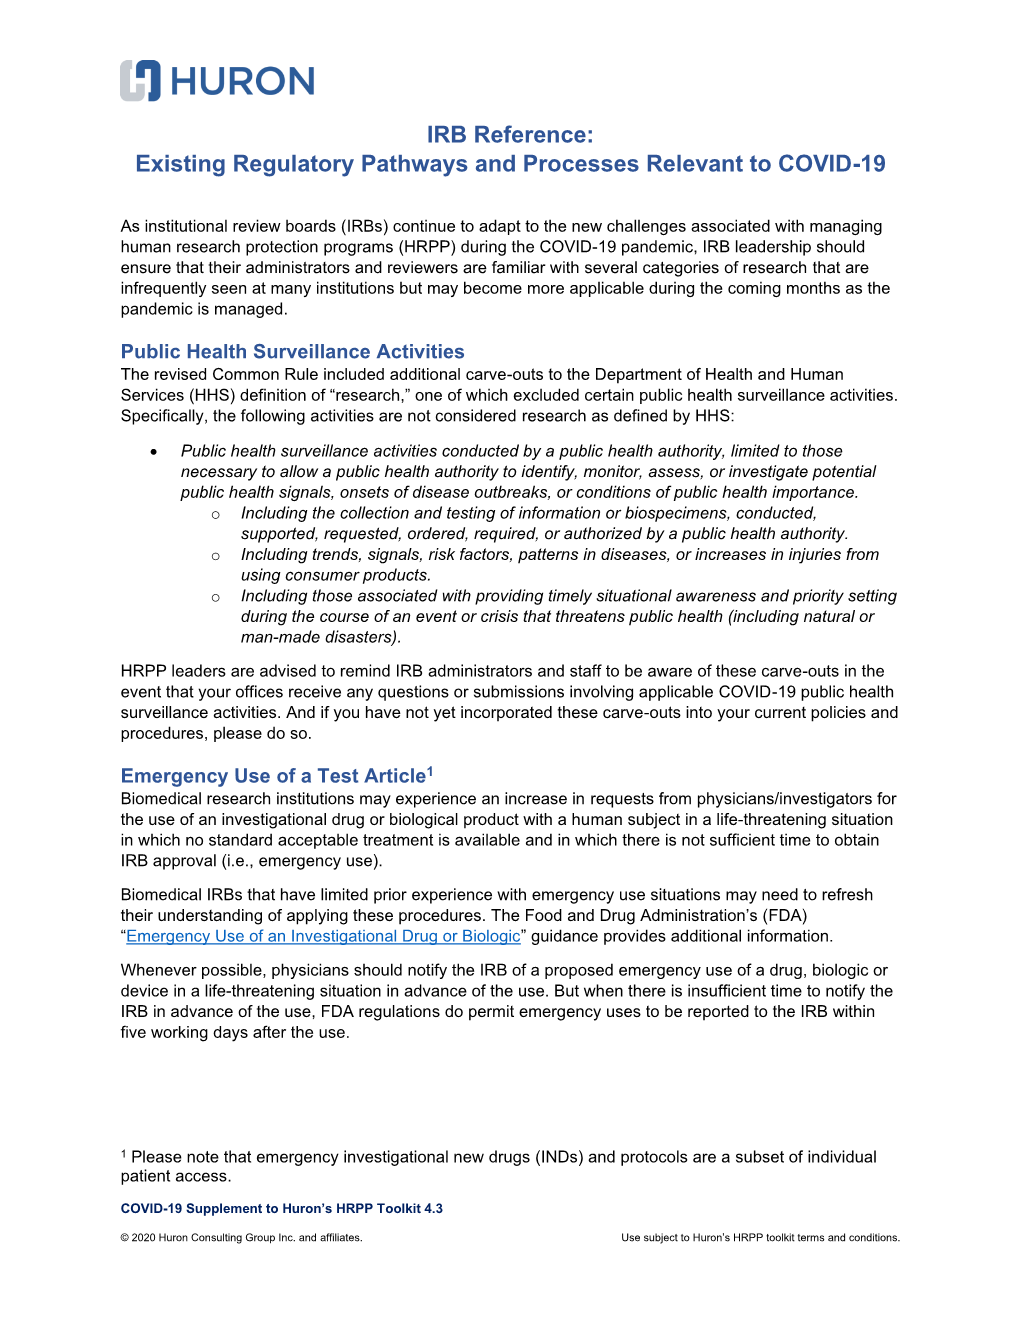 Existing Regulatory Pathways and Processes Relevant to COVID-19